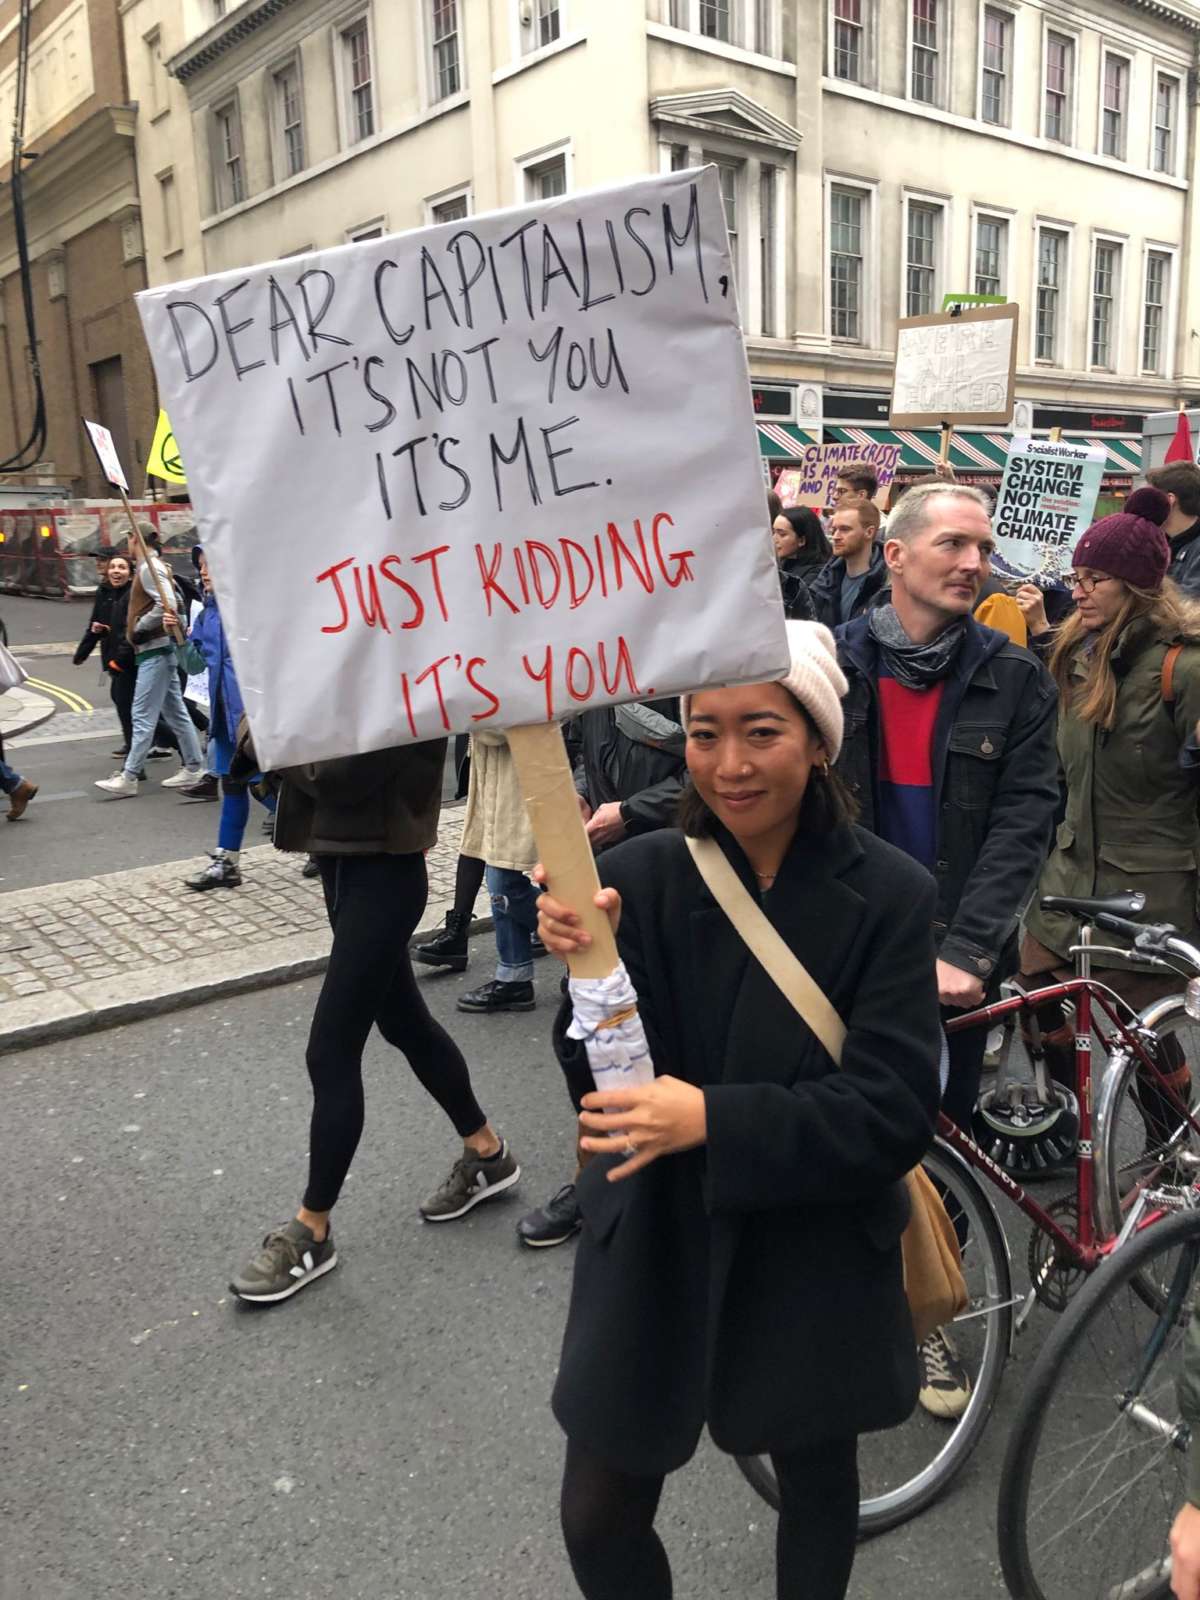 COP26 demonstrator holds a sign that says "DEAR CAPITALISM, IT'S NOT YOU, IT'S ME. JUST KIDDING IT'S YOU." in London, U.K., on November 6, 2021.